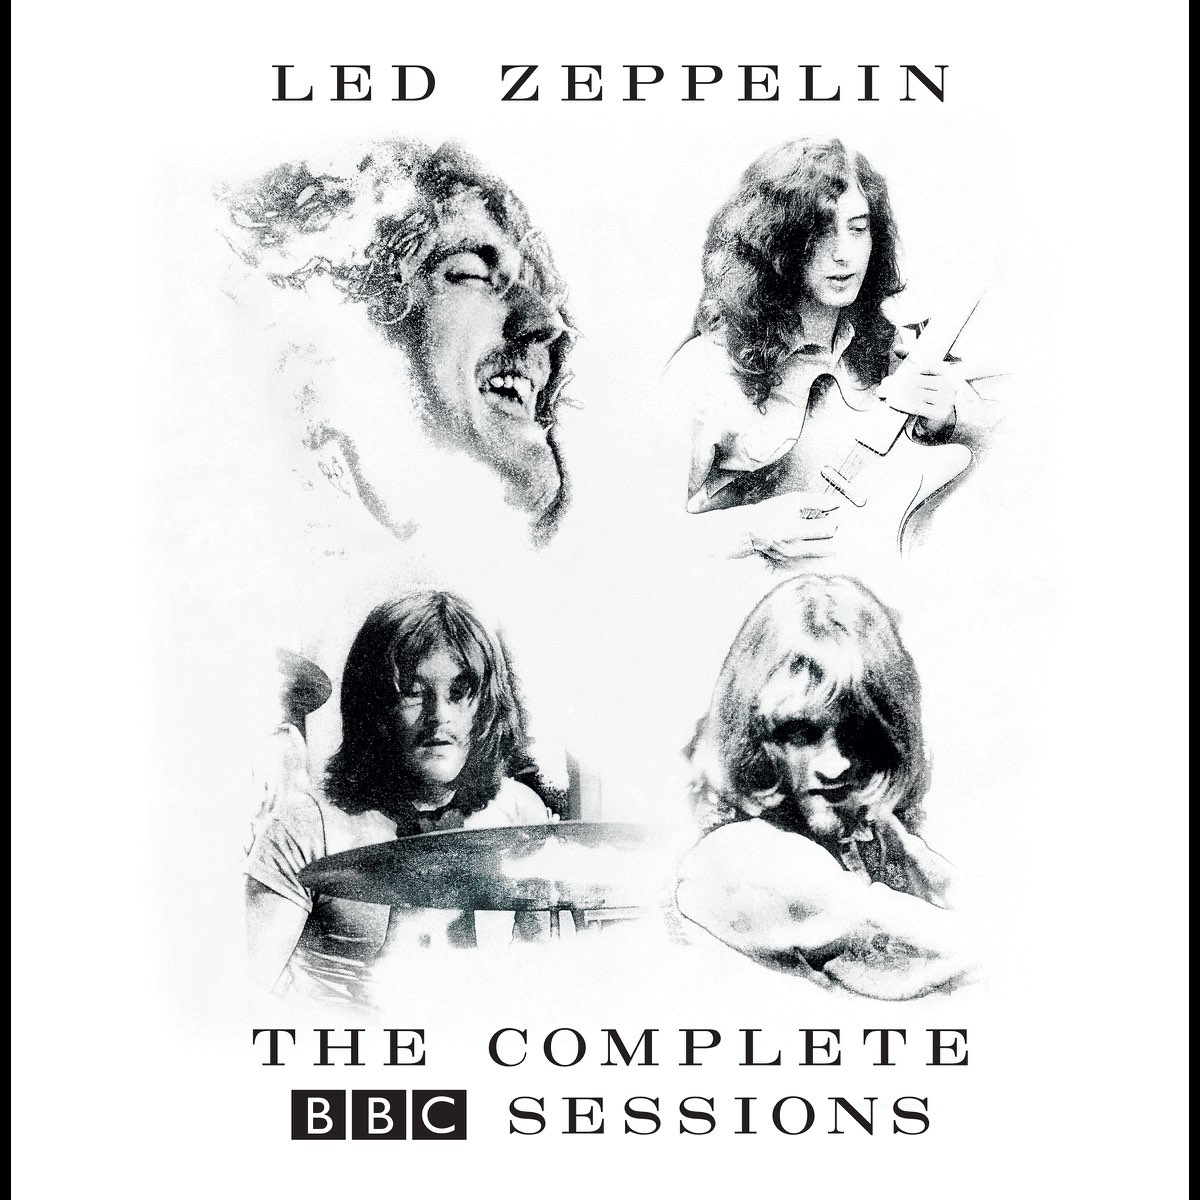 ‎the Complete Bbc Sessions Live By Led Zeppelin On Apple Music